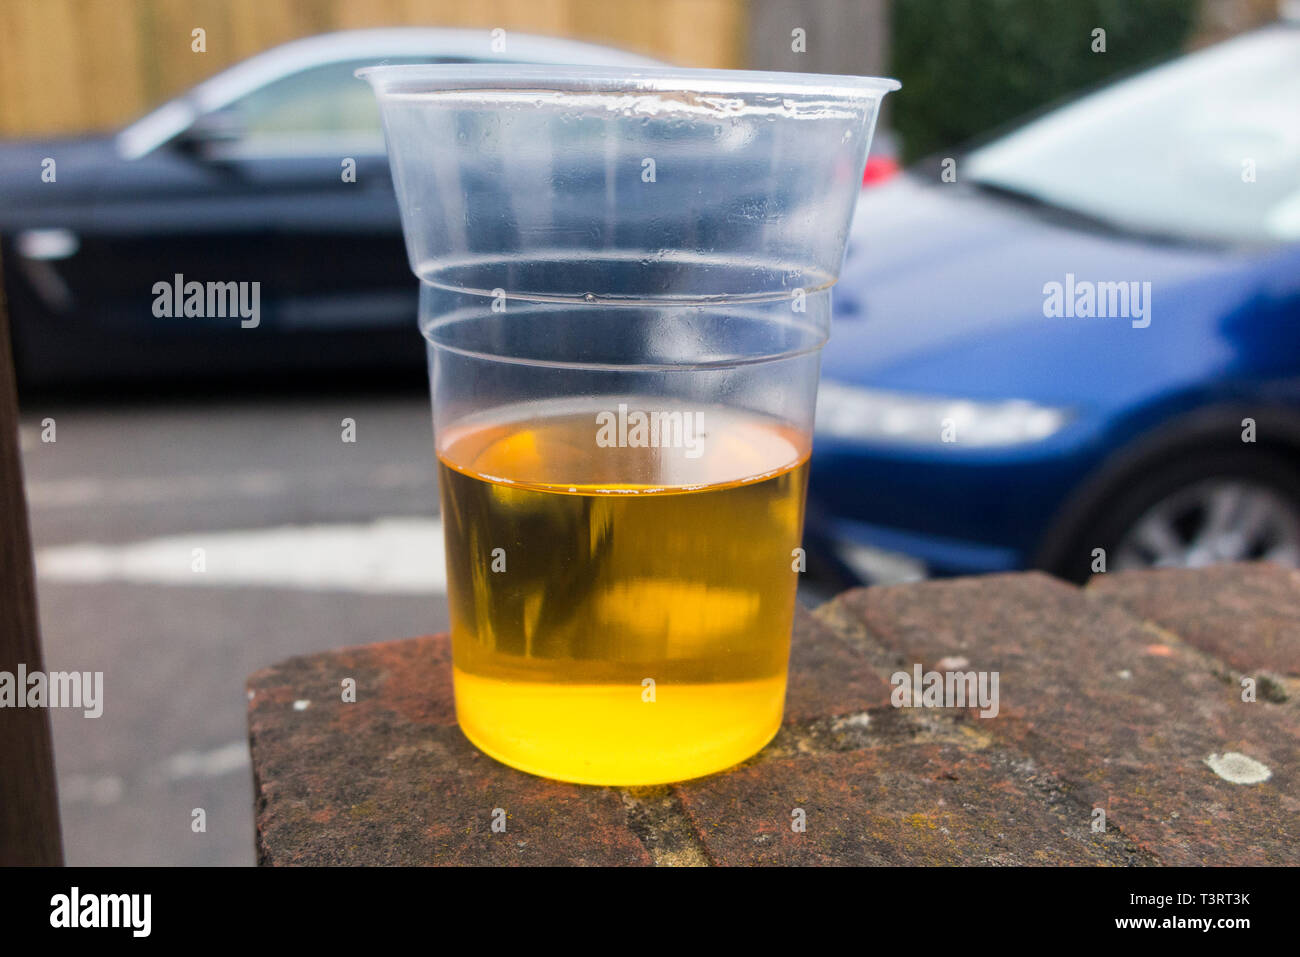 Moving car driving past a half empty plastic beaker of lager to illustrate the theme of drunk / drink driver, & driving while under the influence of alcohol. England UK (108) Stock Photo